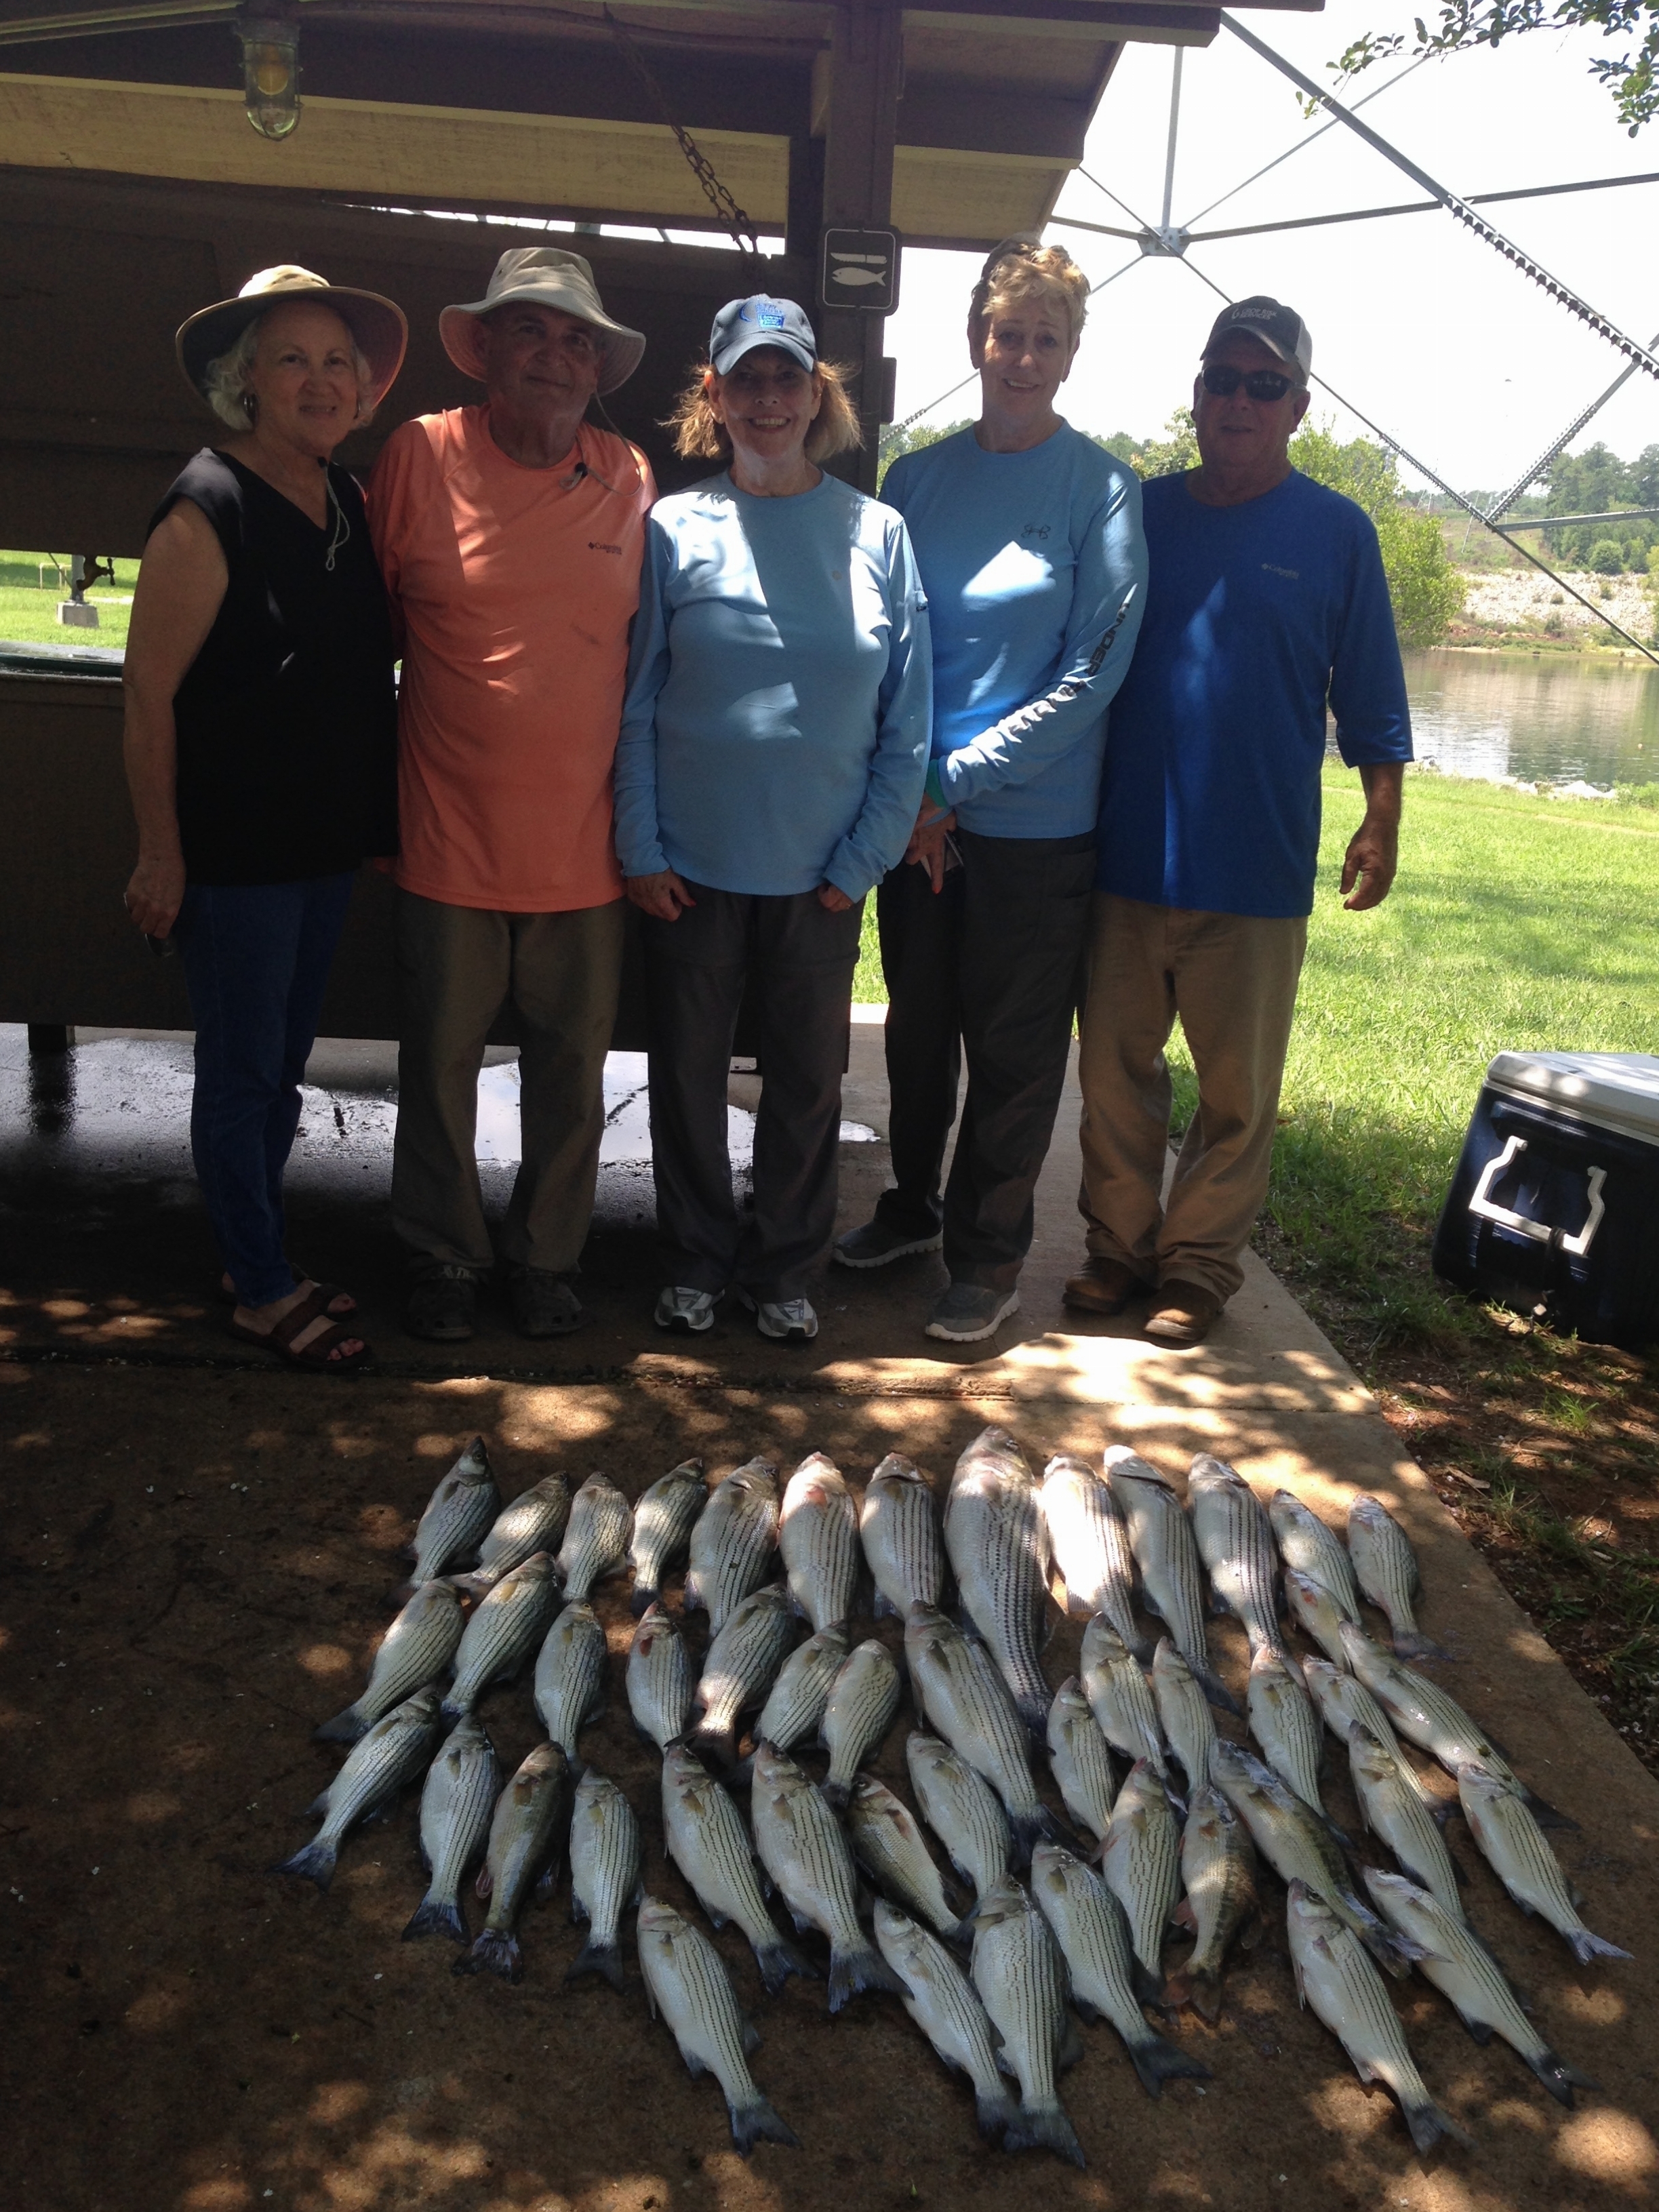 July 10, 2017 My wife Lucy, Her brother Ricky Cleghorn, his wife Juanita, Cindy and Phil Gilley all from Sycamore, Ga. with their catch of the day.